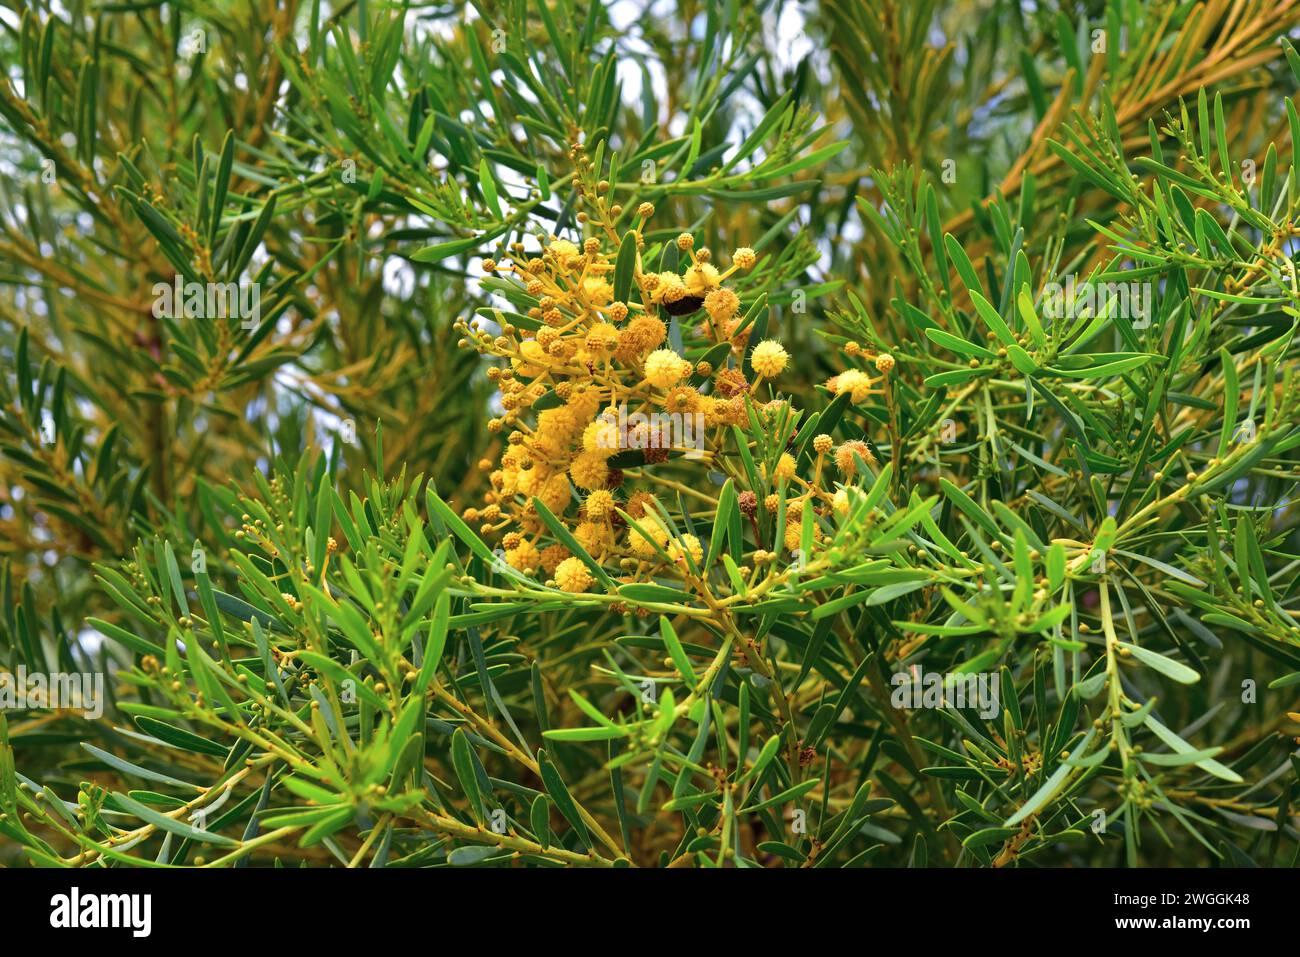 Port Lincoln wattle (Acacia anceps) is a big shrub native to southwestern Australia. Flowers and leaves detail. Stock Photo